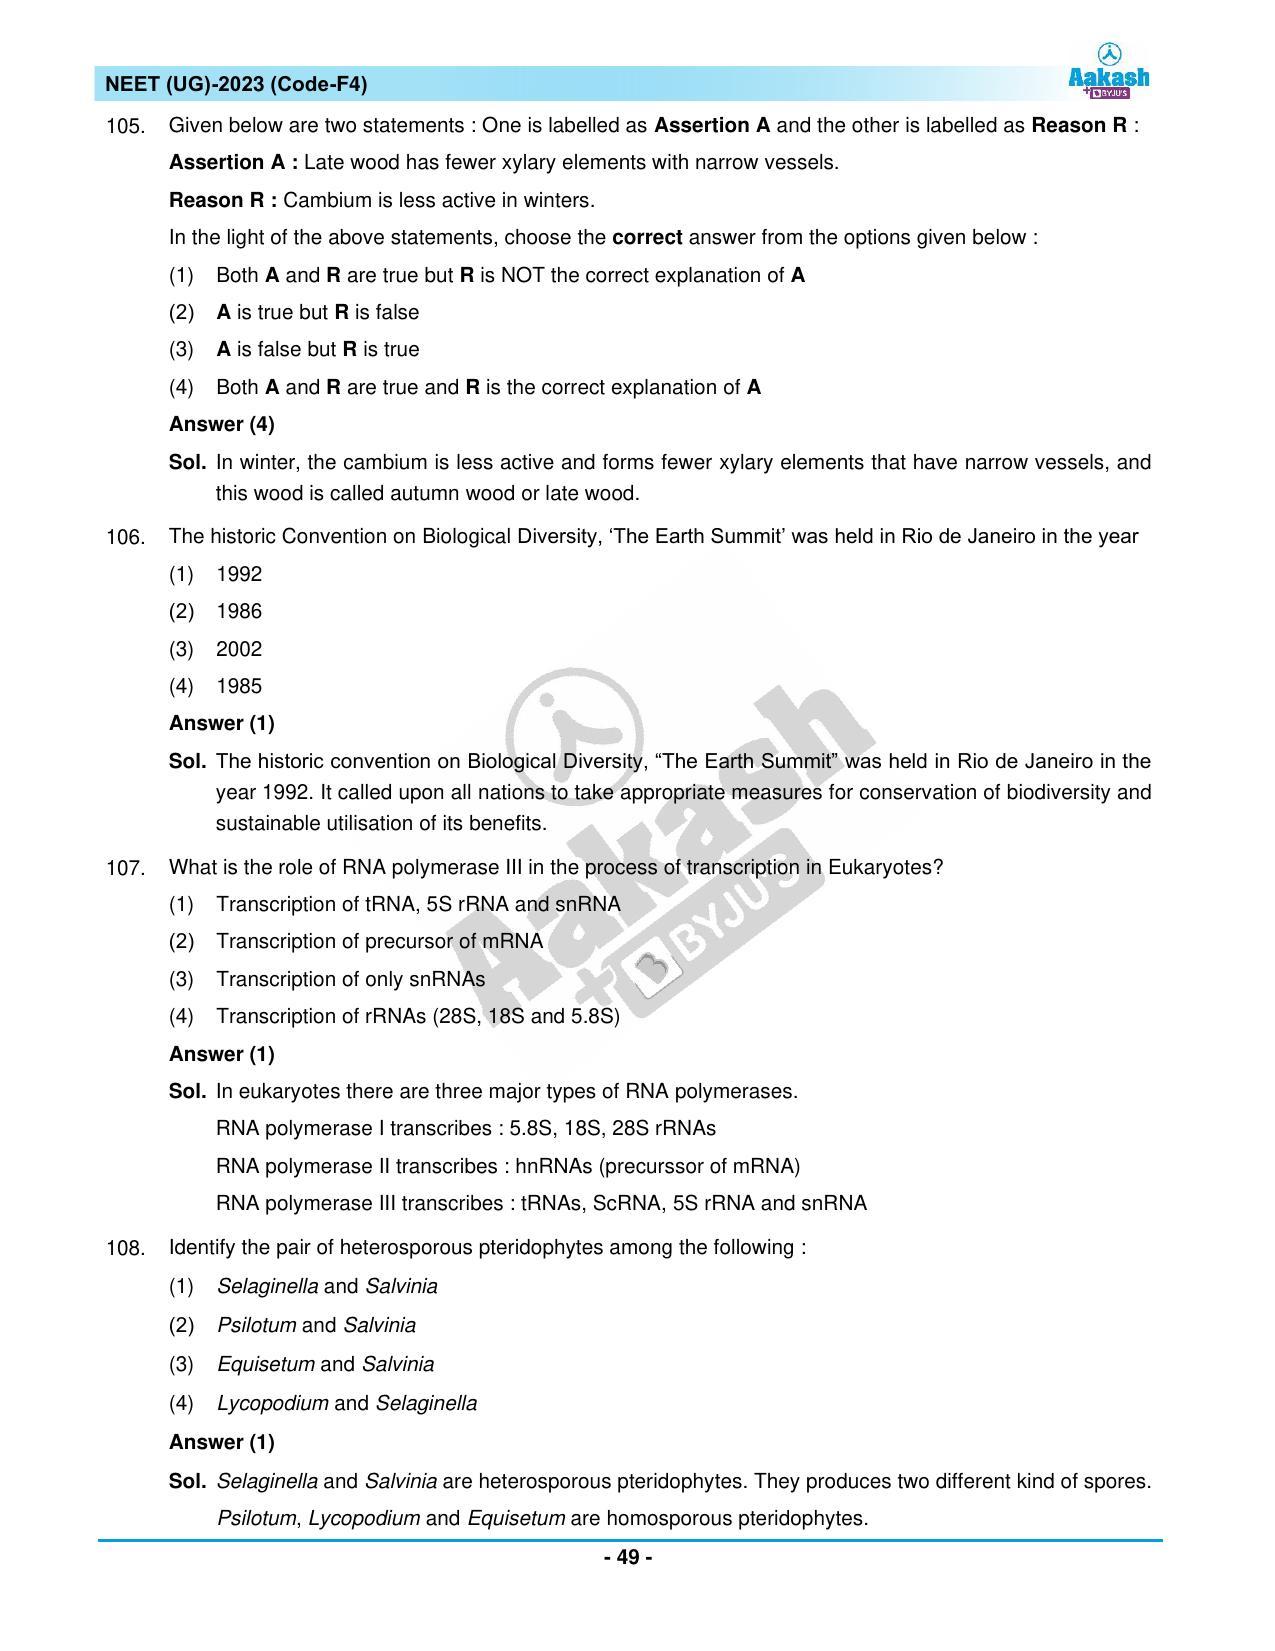 NEET 2023 Question Paper F4 - Page 49